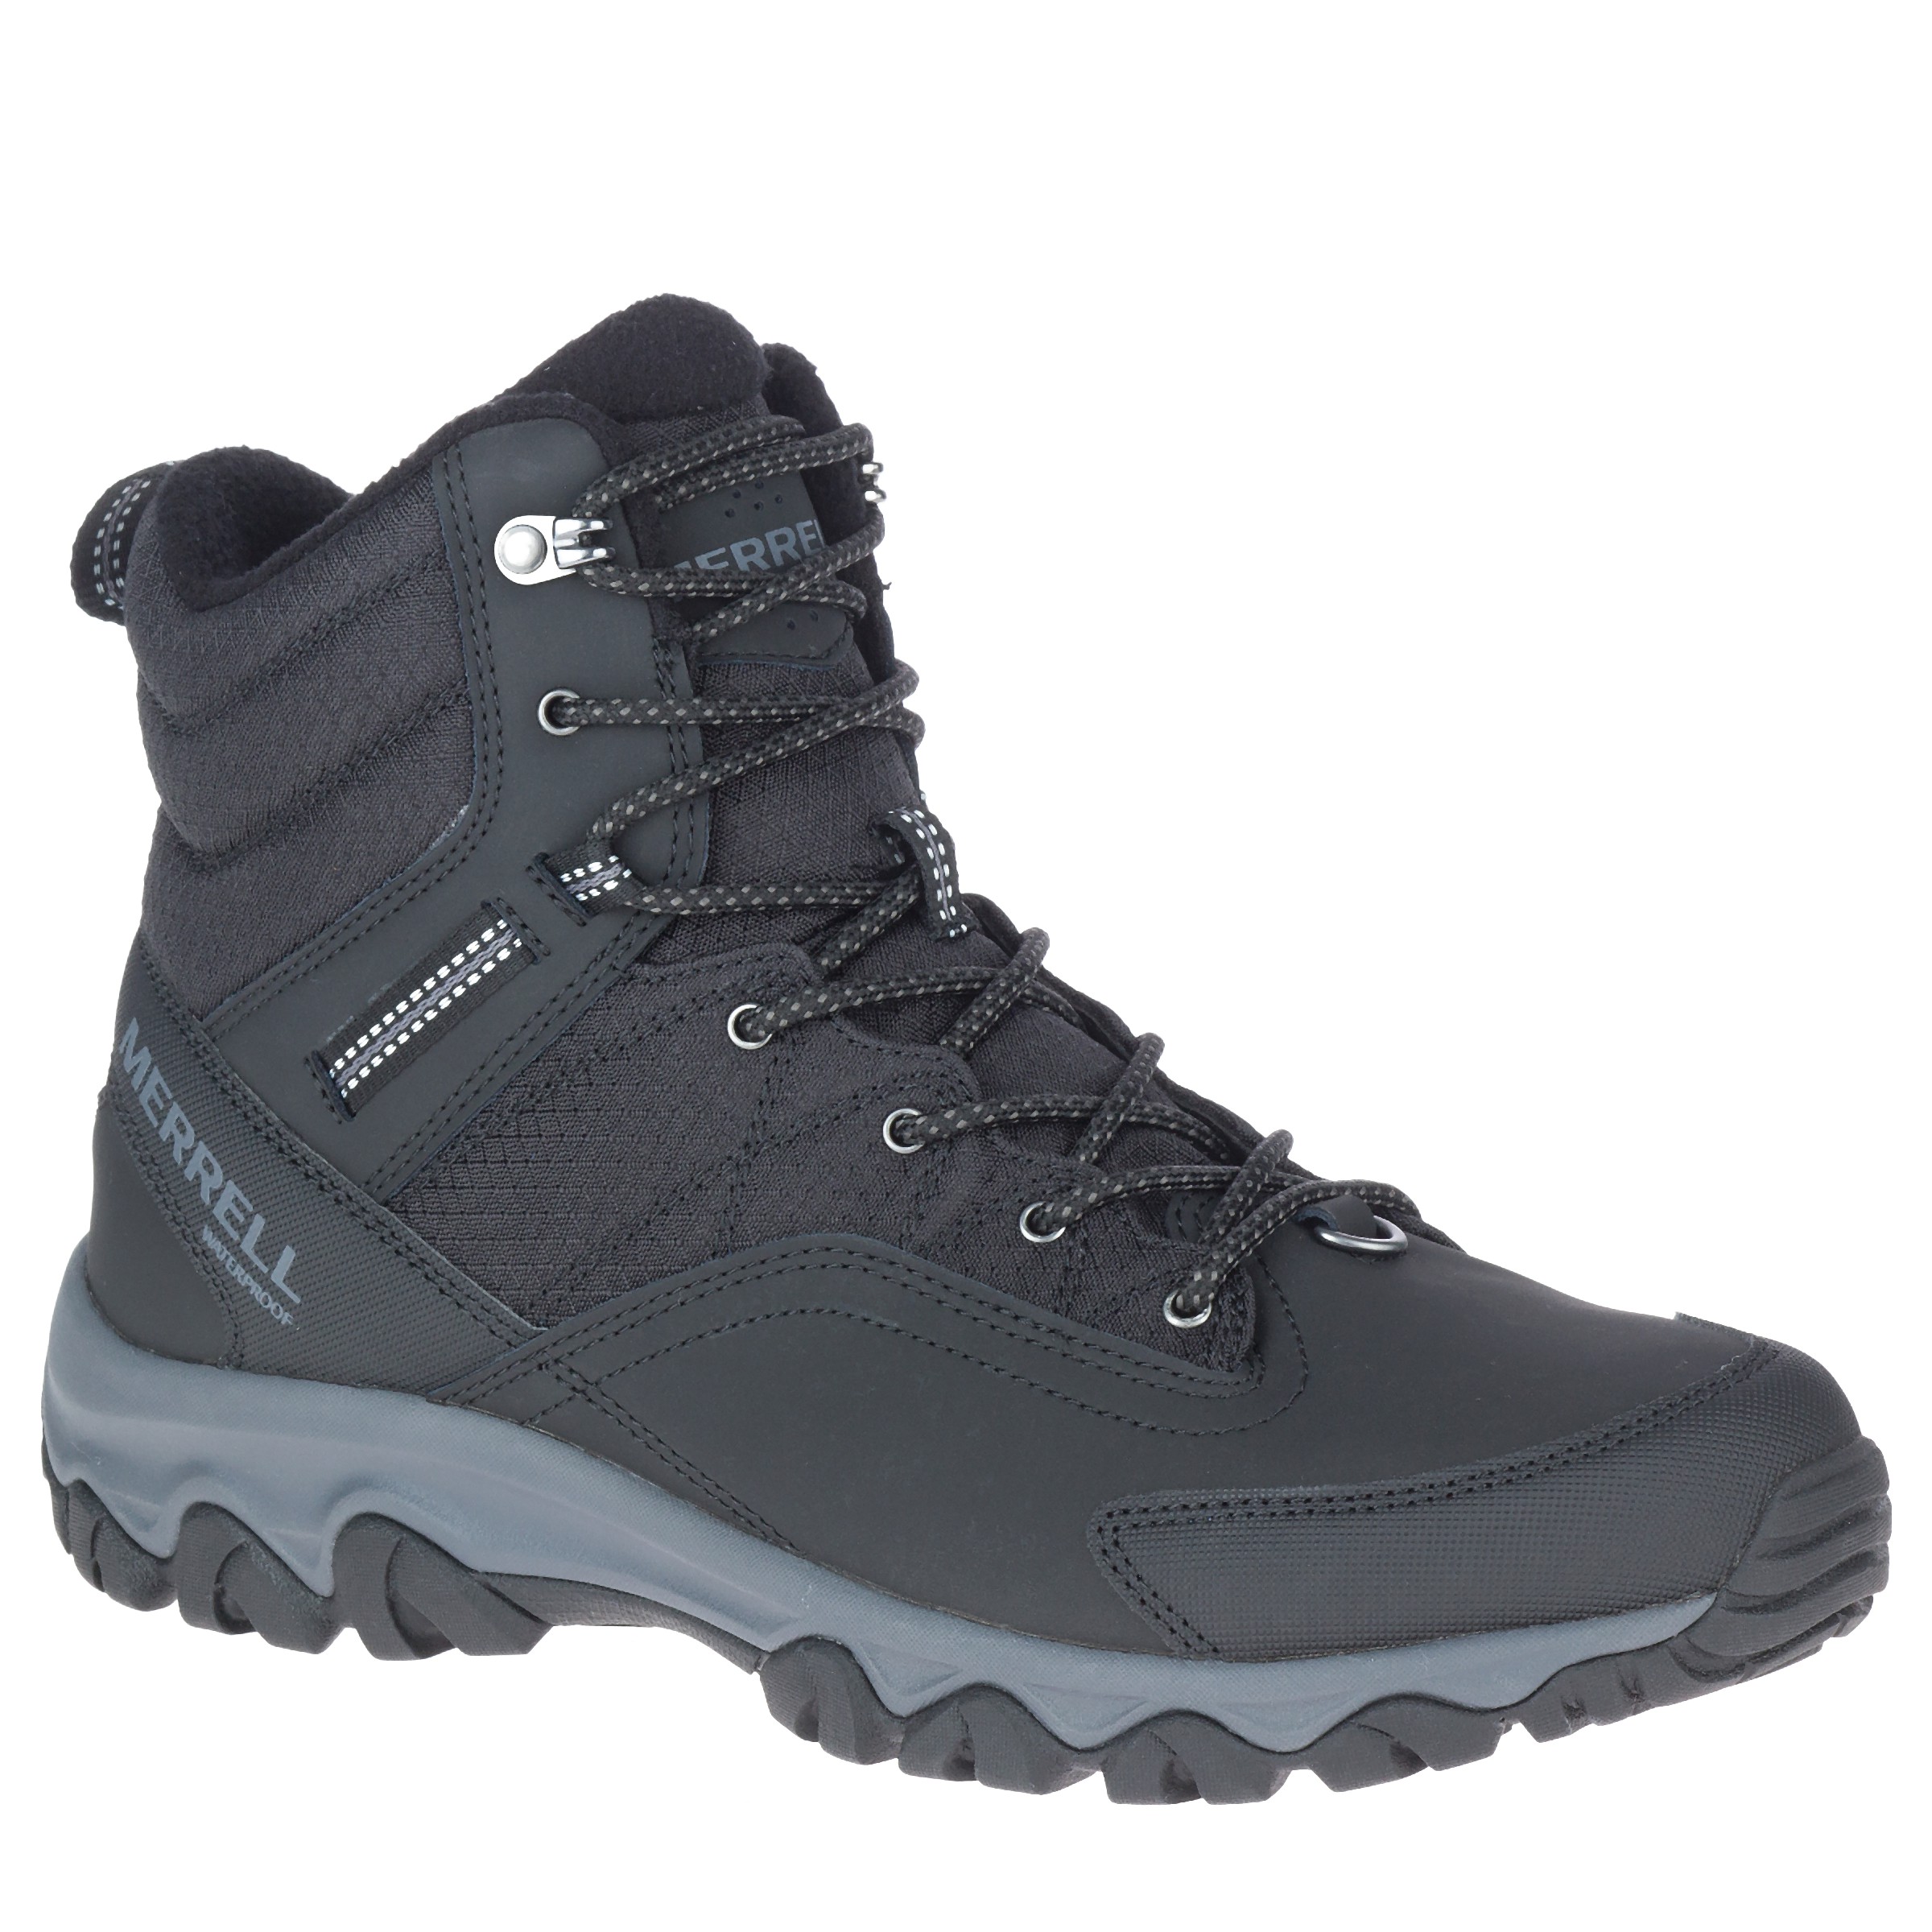 Men's Thermo Akita Mid Waterproof Cold Weather Boot